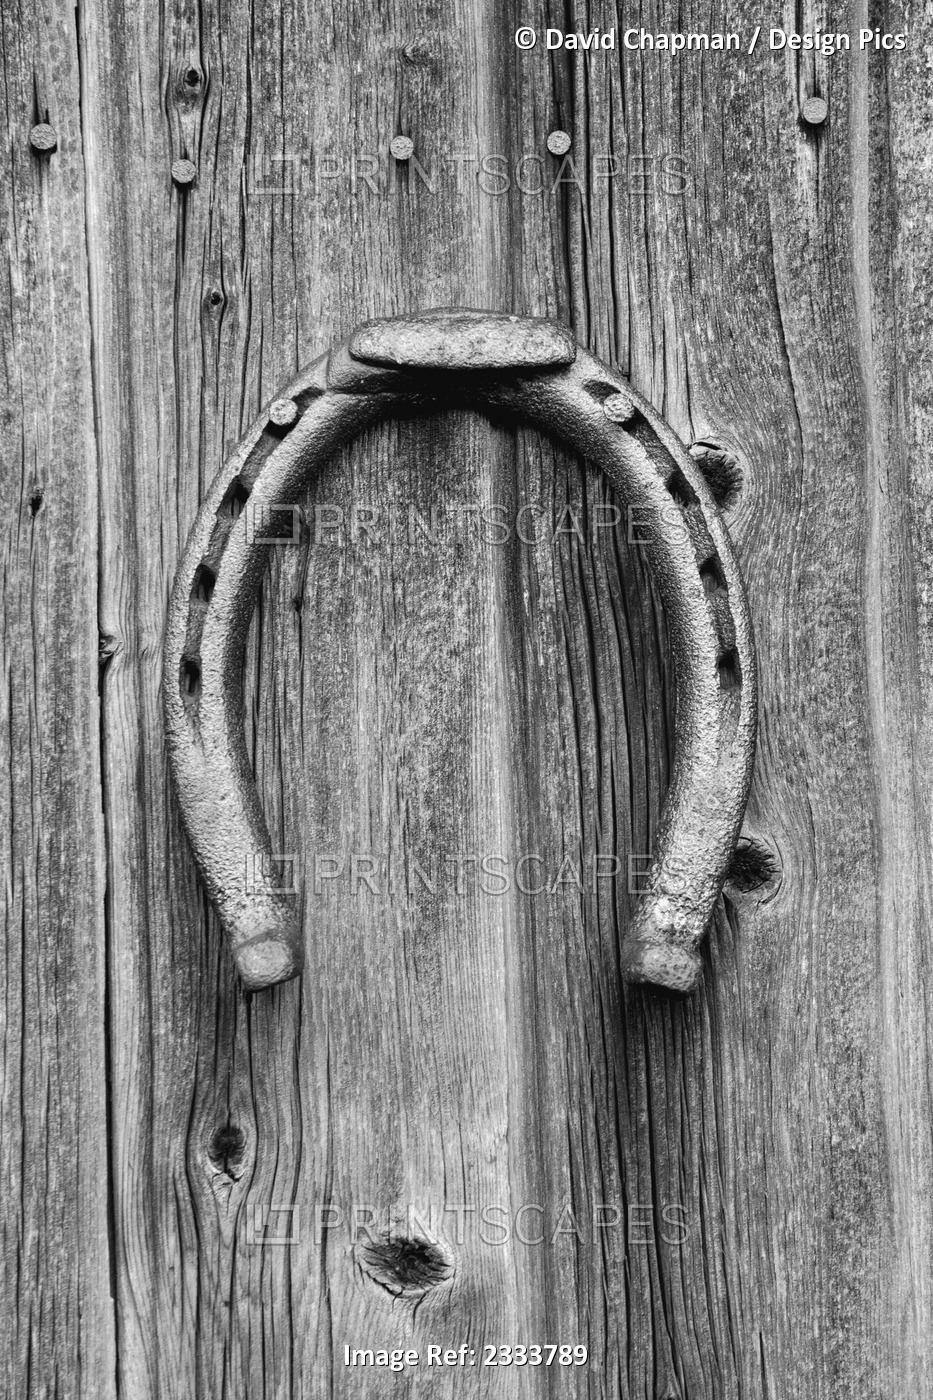 Horseshoe hung on a wooden wall; Iron Hill, Quebec, Canada